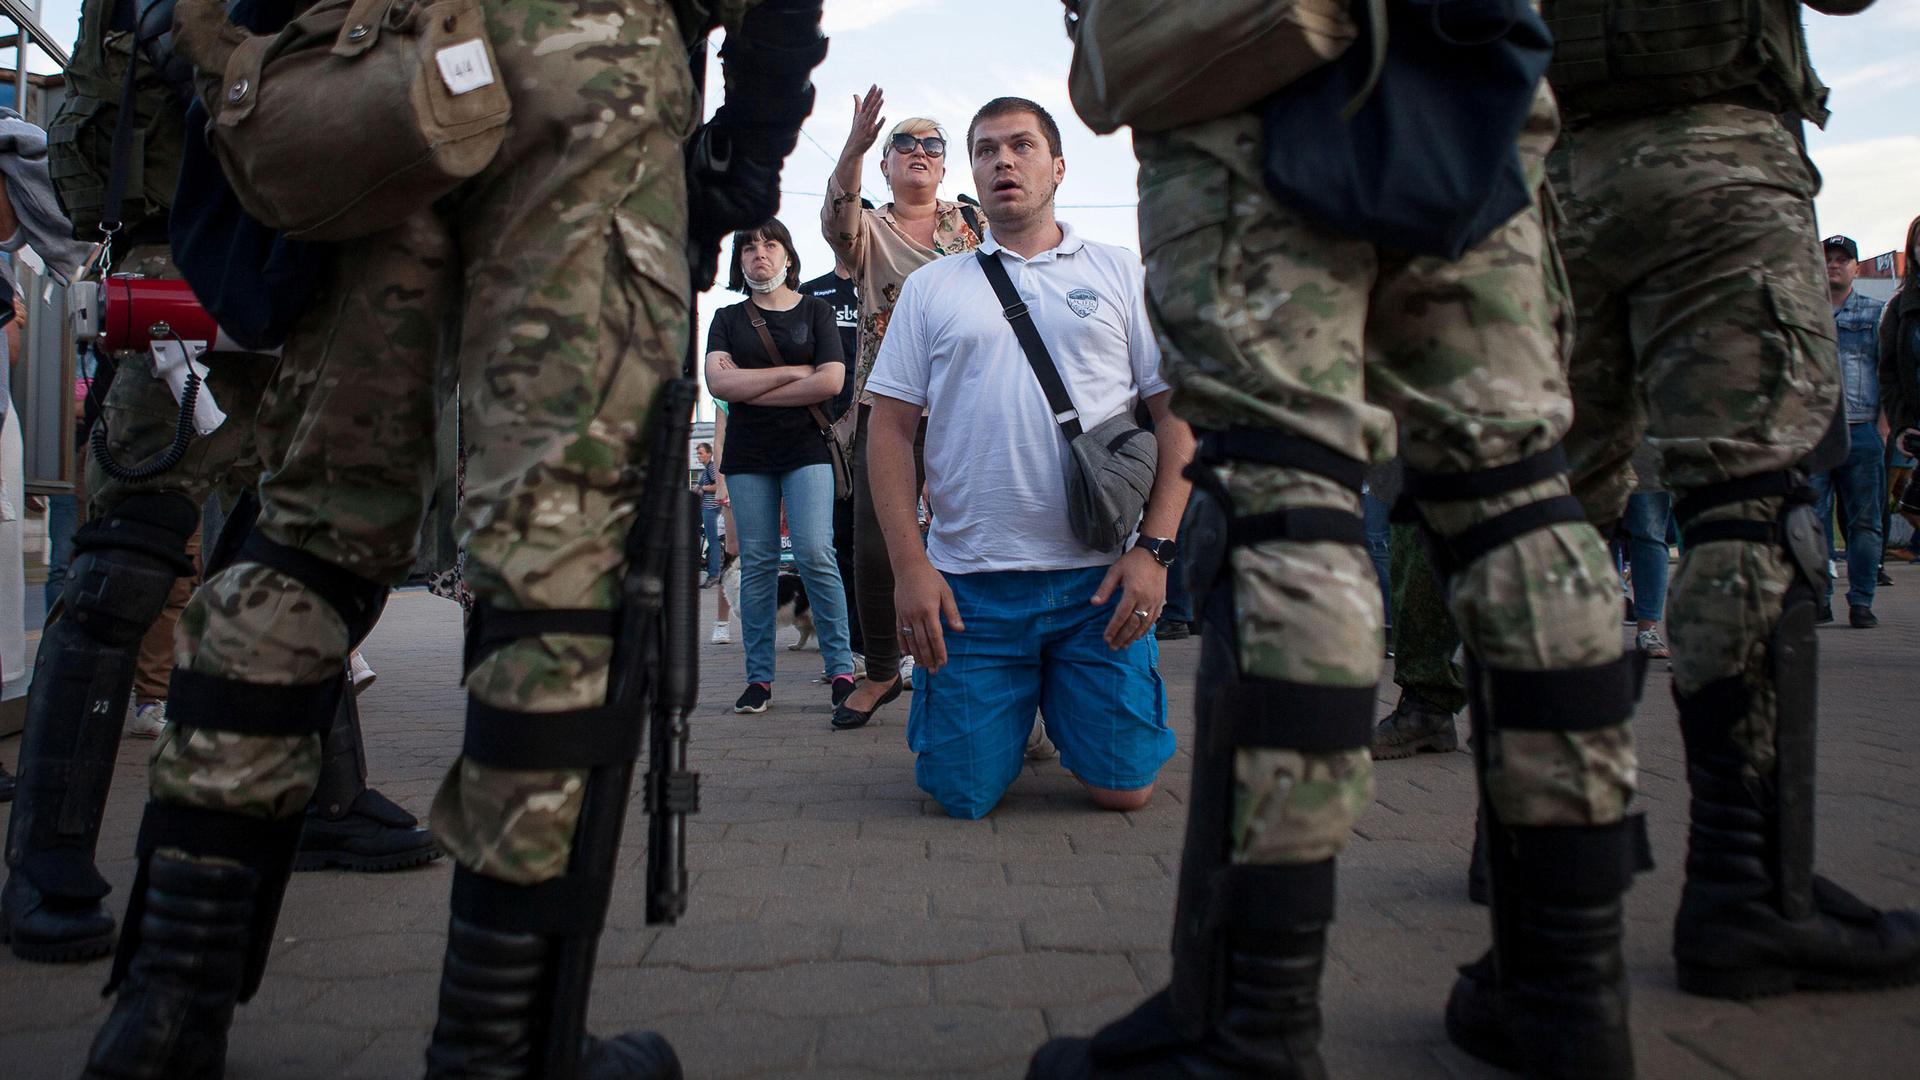 A man is shown kneeling on the ground in front of several security officers dressed in camoflage and carrying weapons.